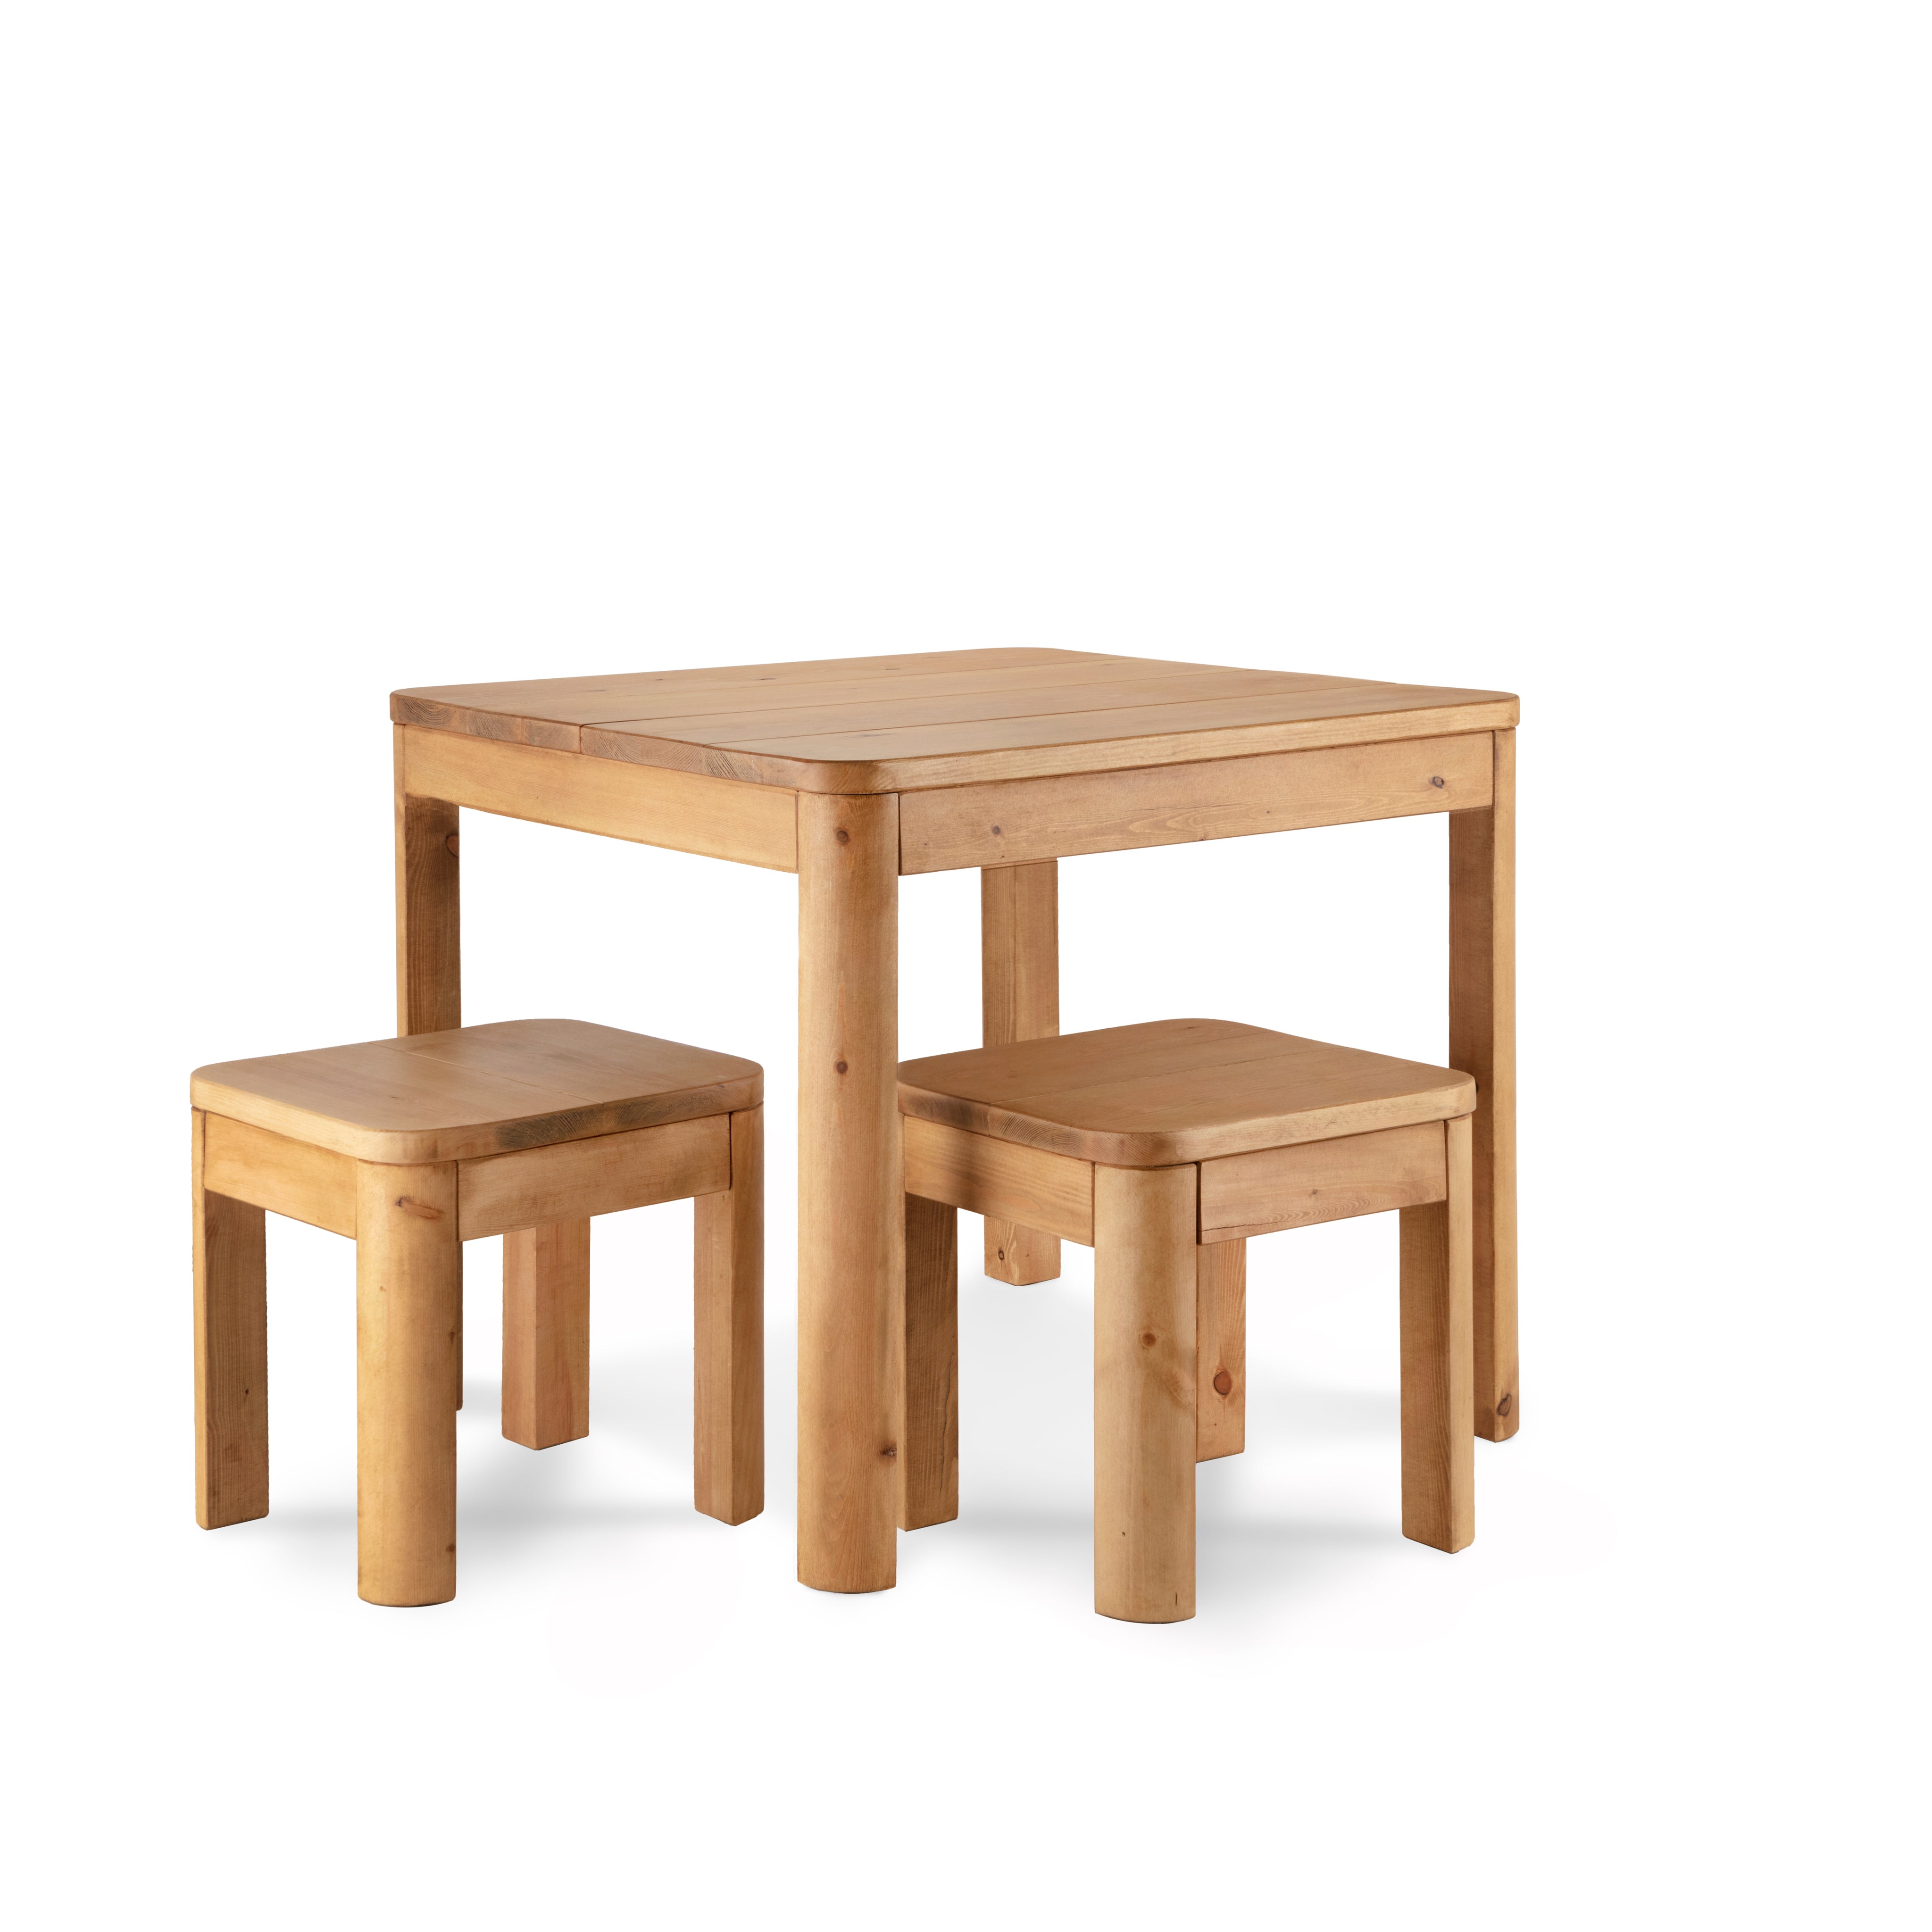 Gosforth Square Dining Table Set